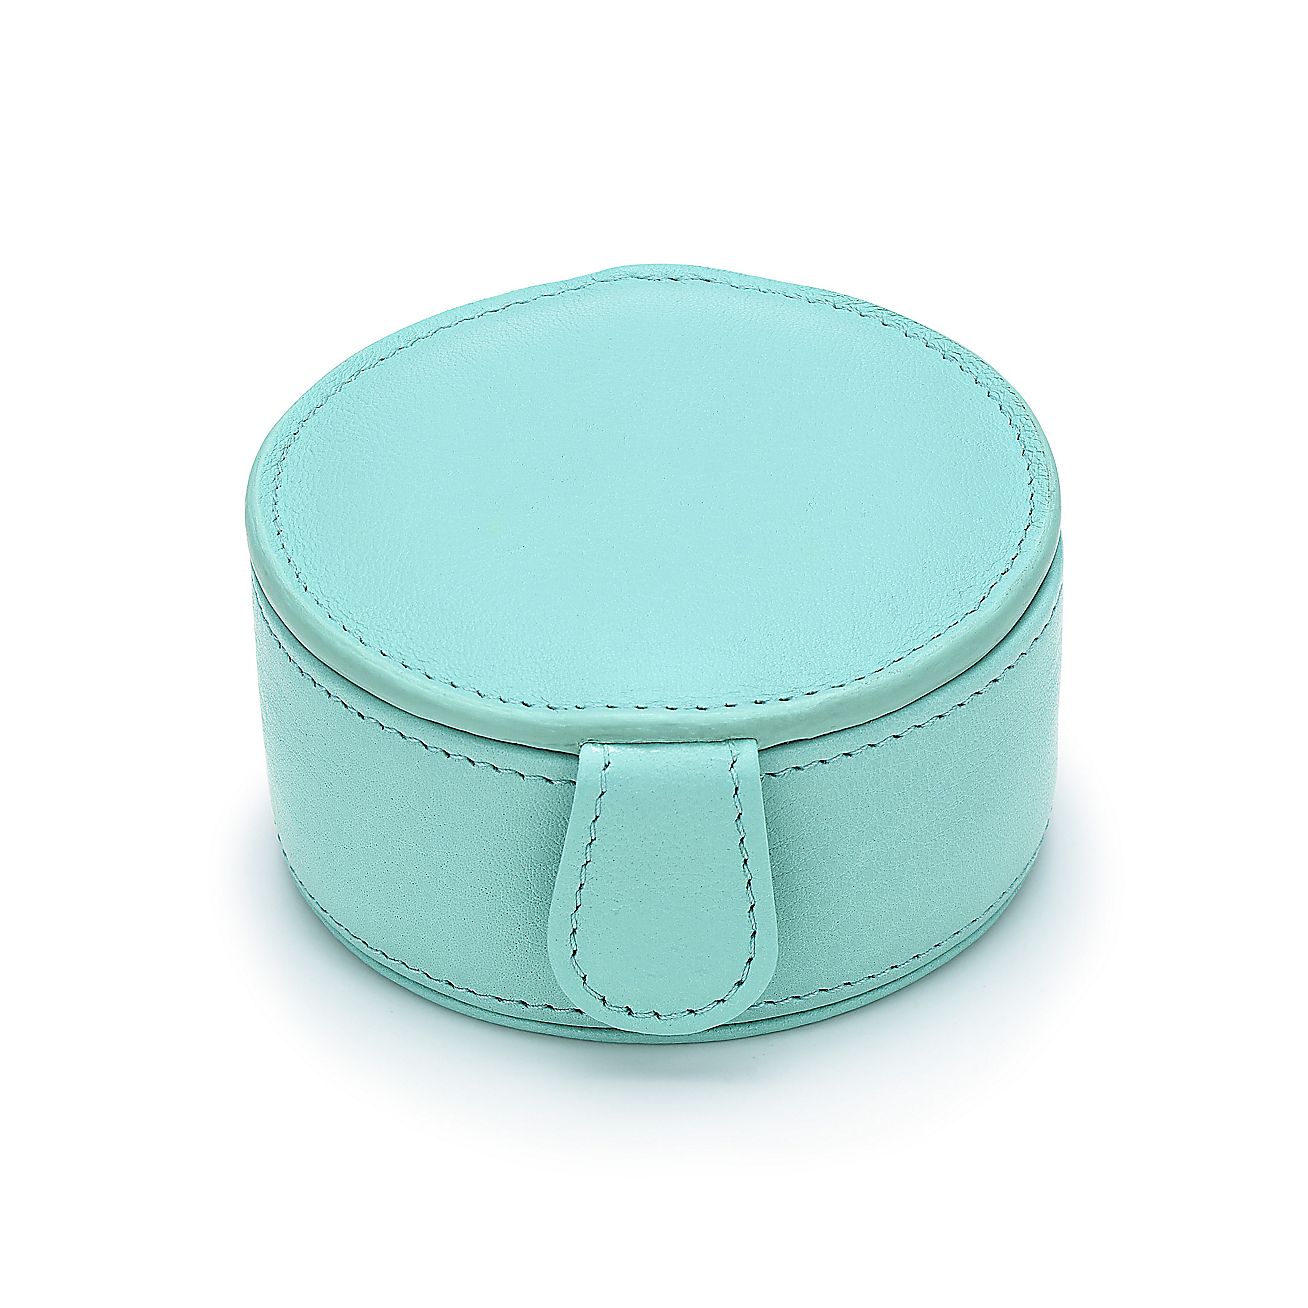 Tiffany Blue® travel jewelry case in leather. | Tiffany & Co.